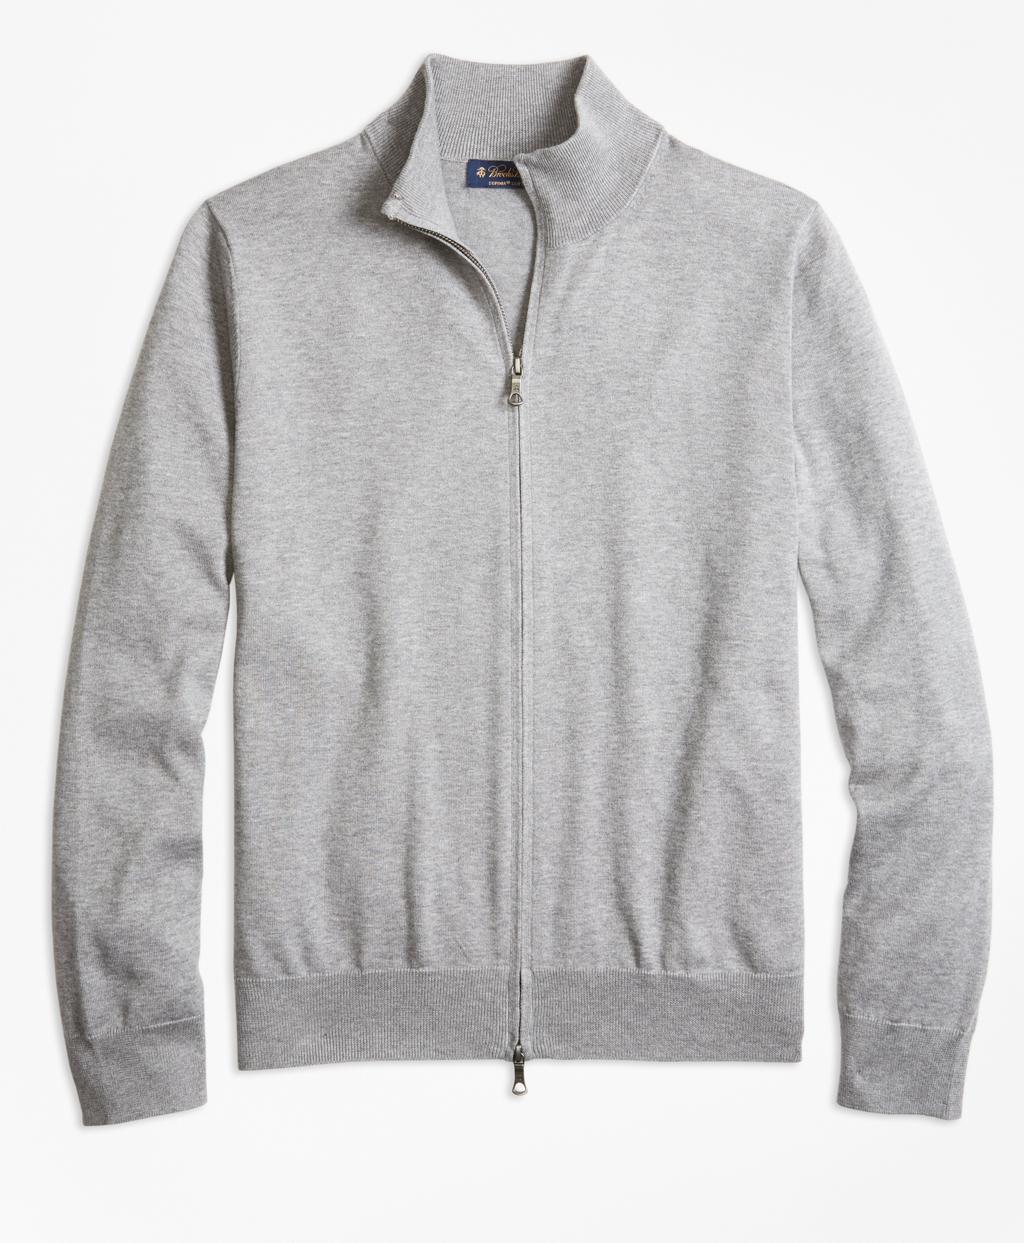 Lyst - Brooks Brothers Supima® Cotton Full-zip Cardigan in Gray for Men